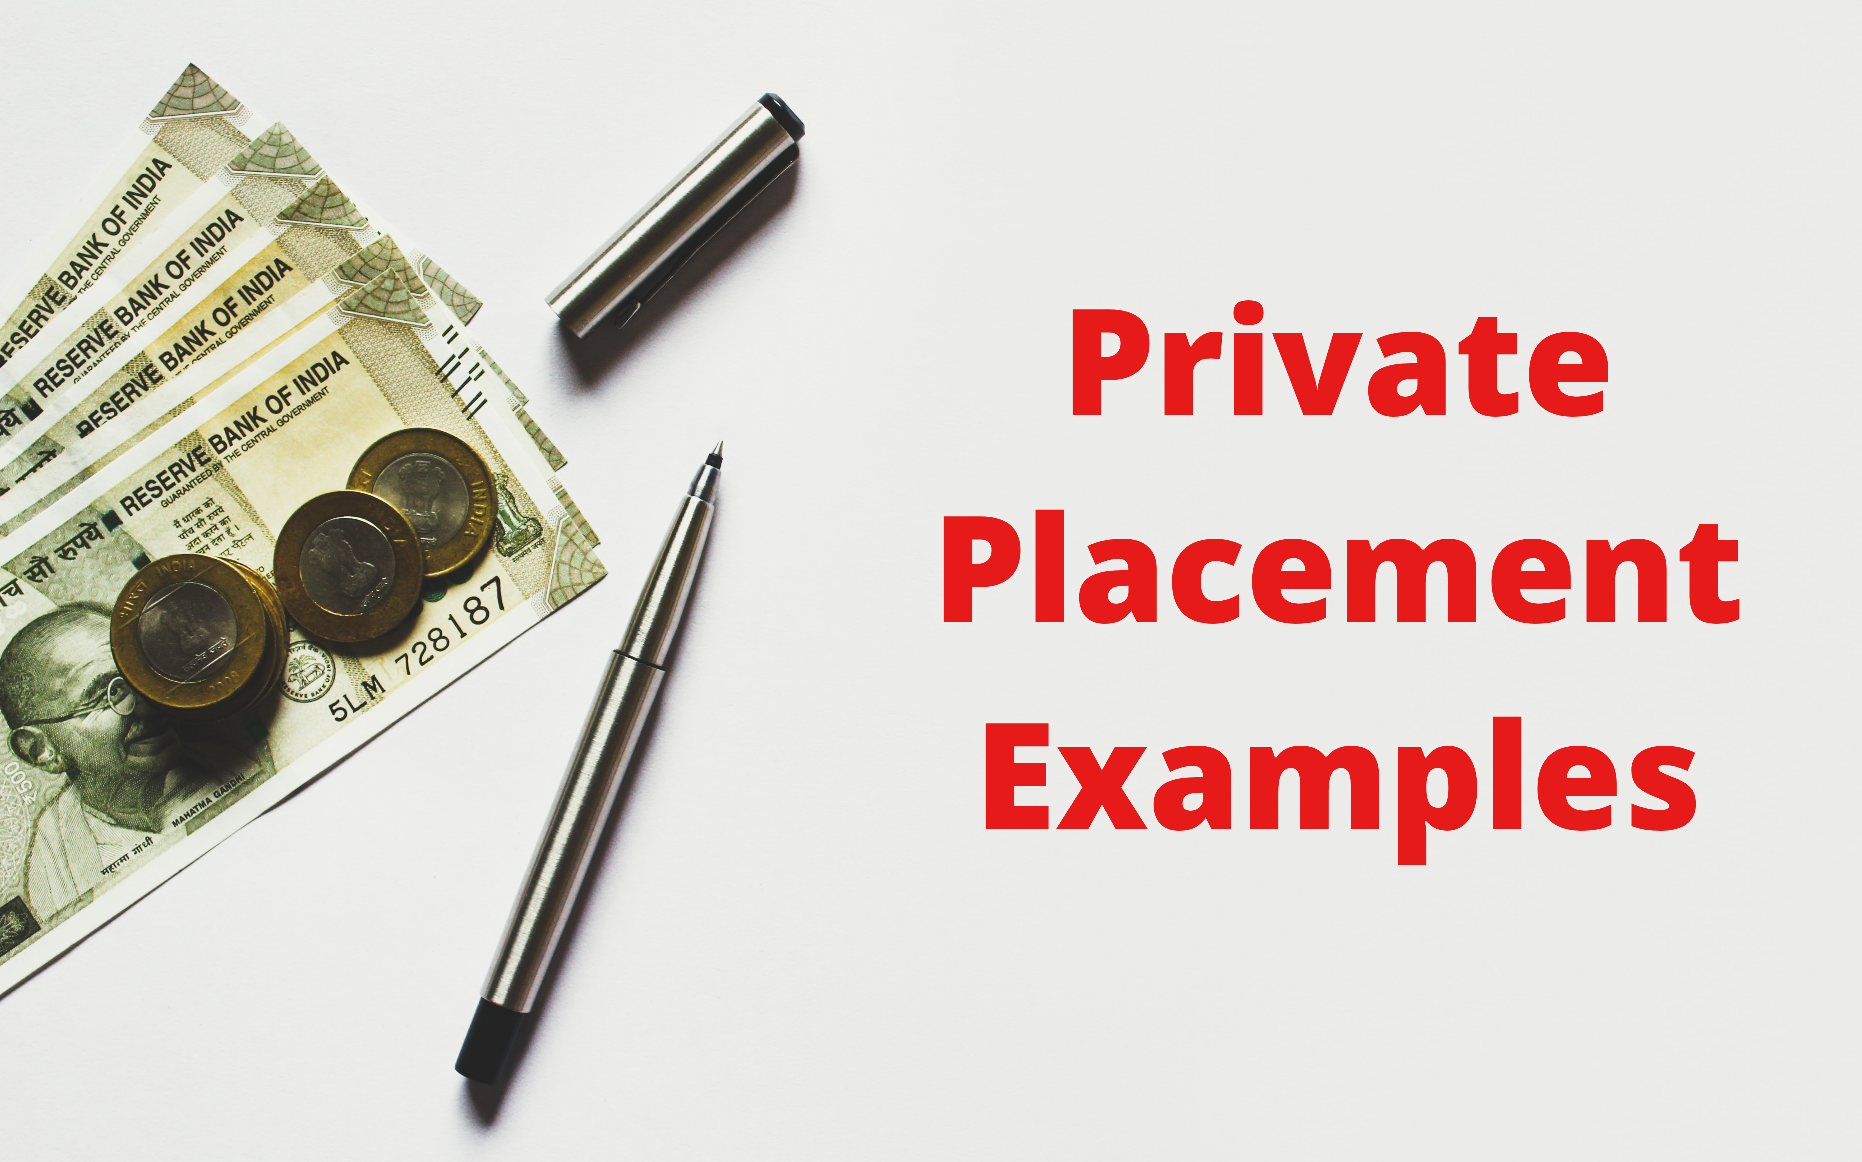 Real-World Private Placement Examples and Their Impact on the Businesses